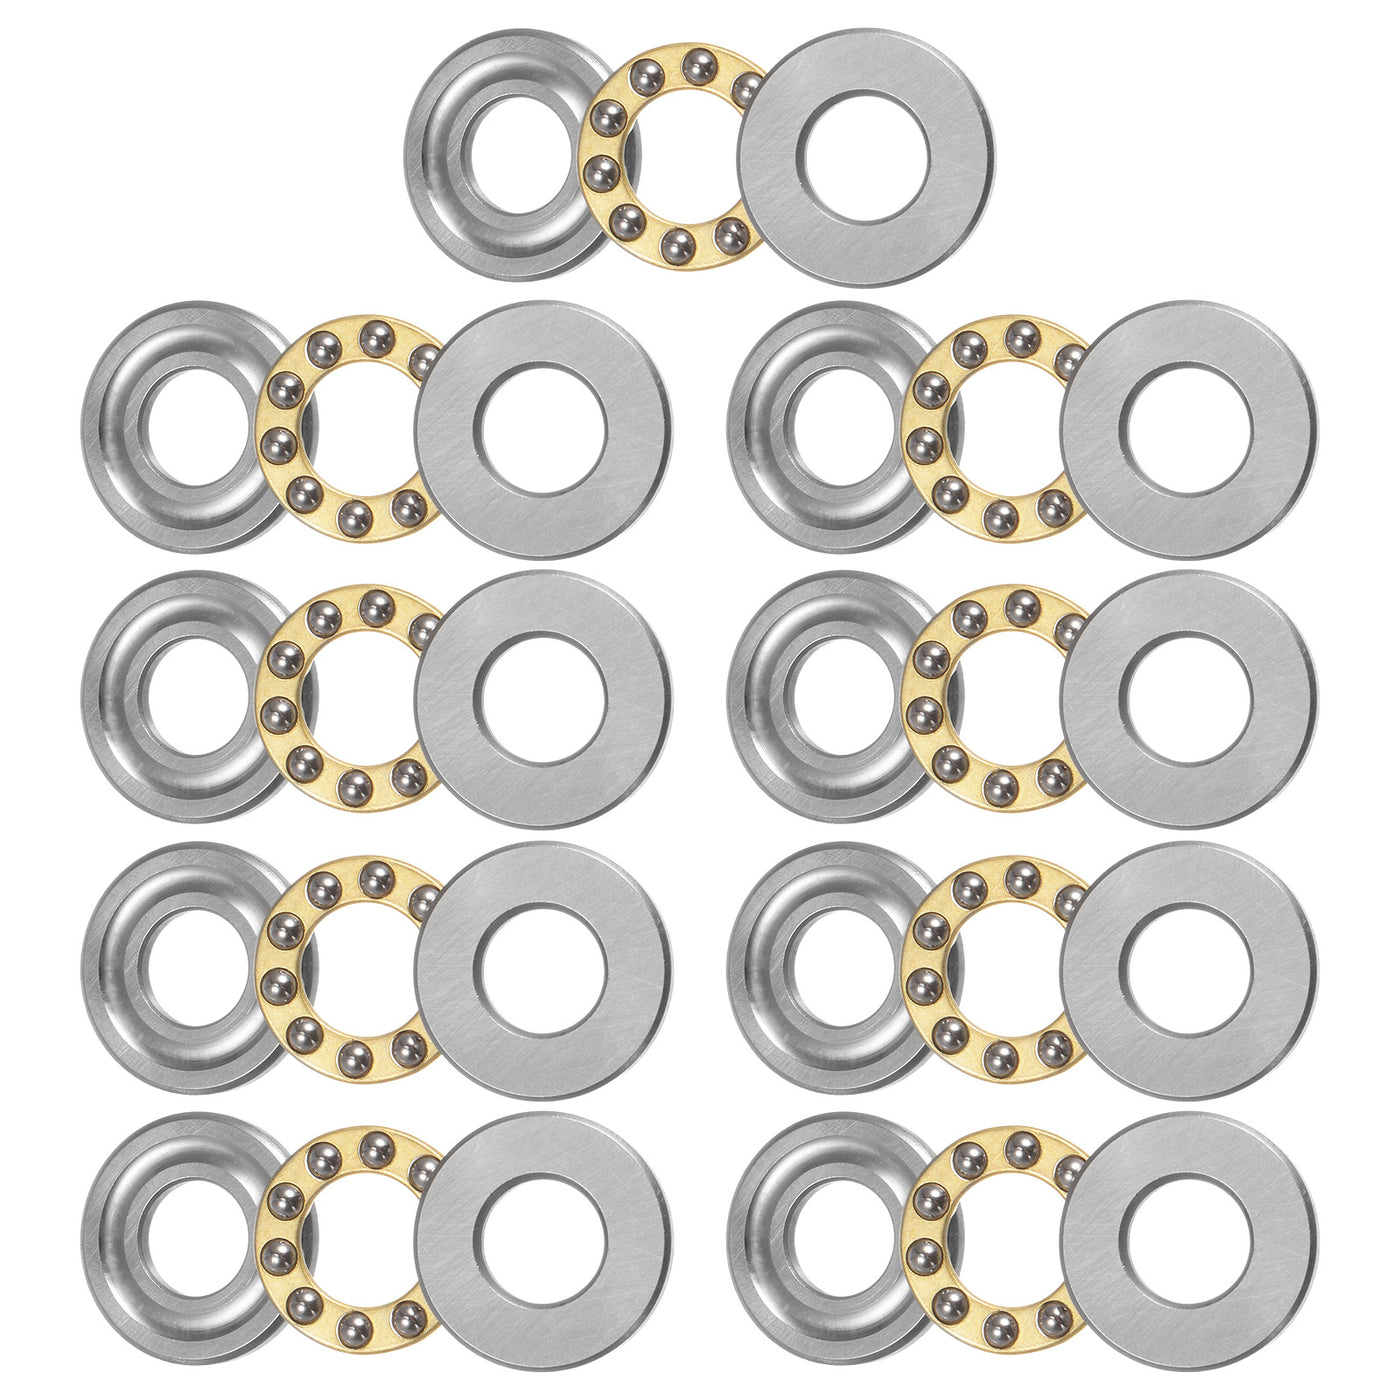 uxcell Uxcell F9-20M Thrust Ball Bearing 9x20x7mm Brass with Washers 9pcs